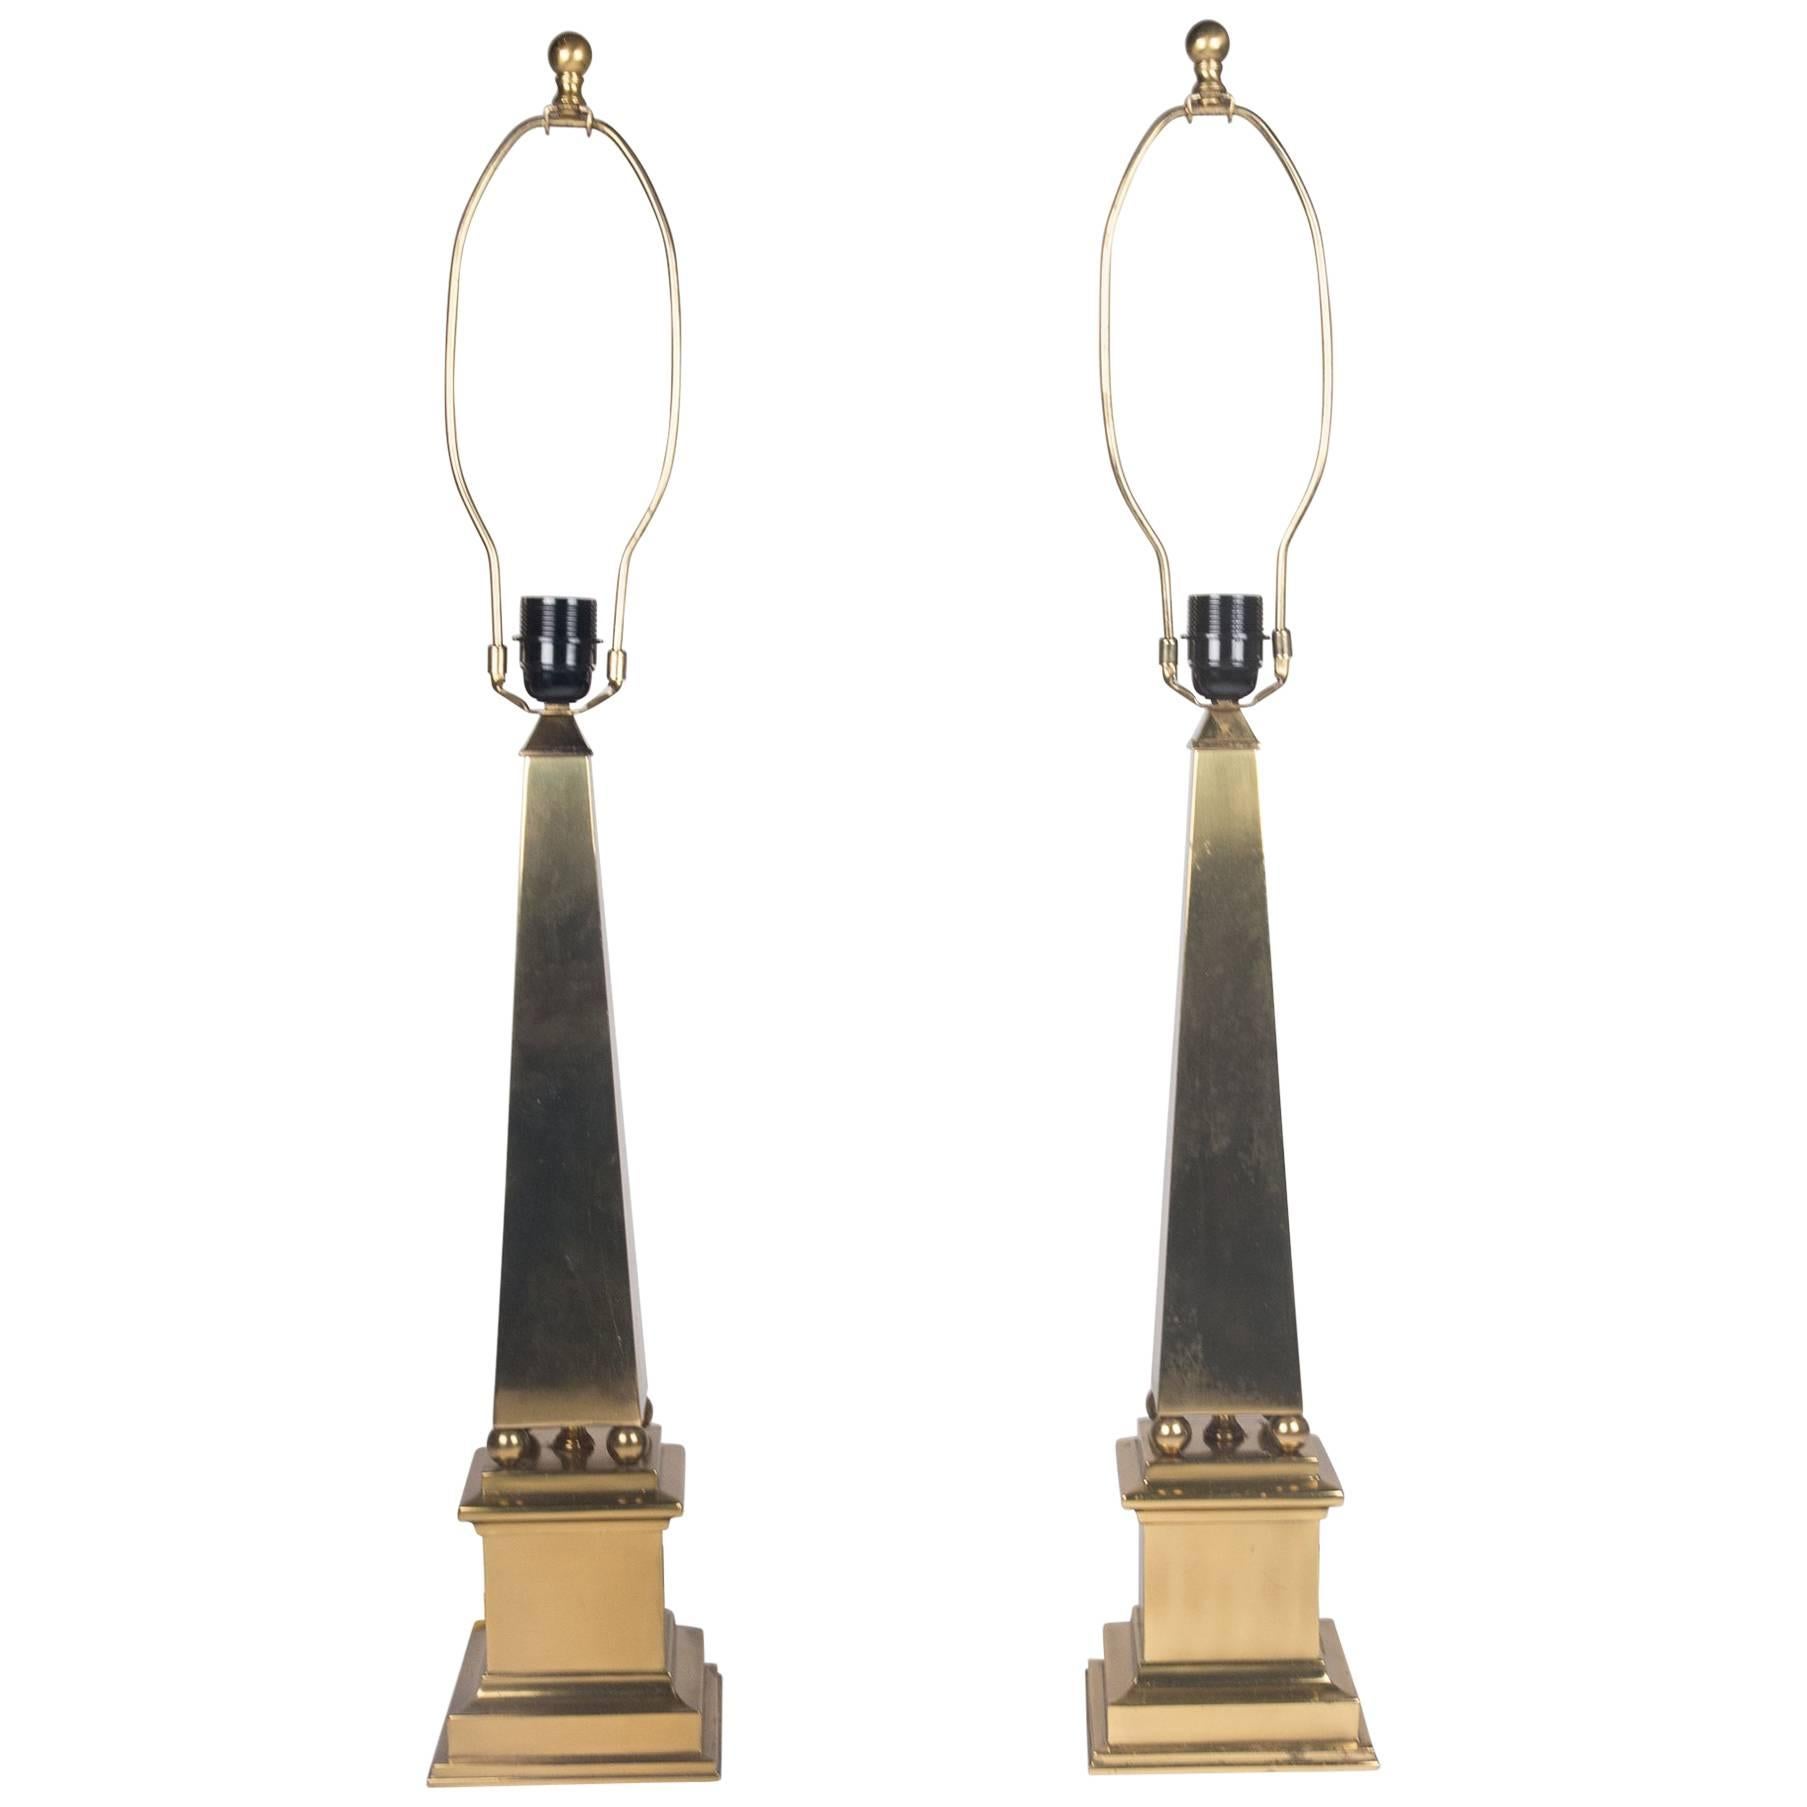 Brass Obelisk Table Lamps by Marbro, American, 1960s